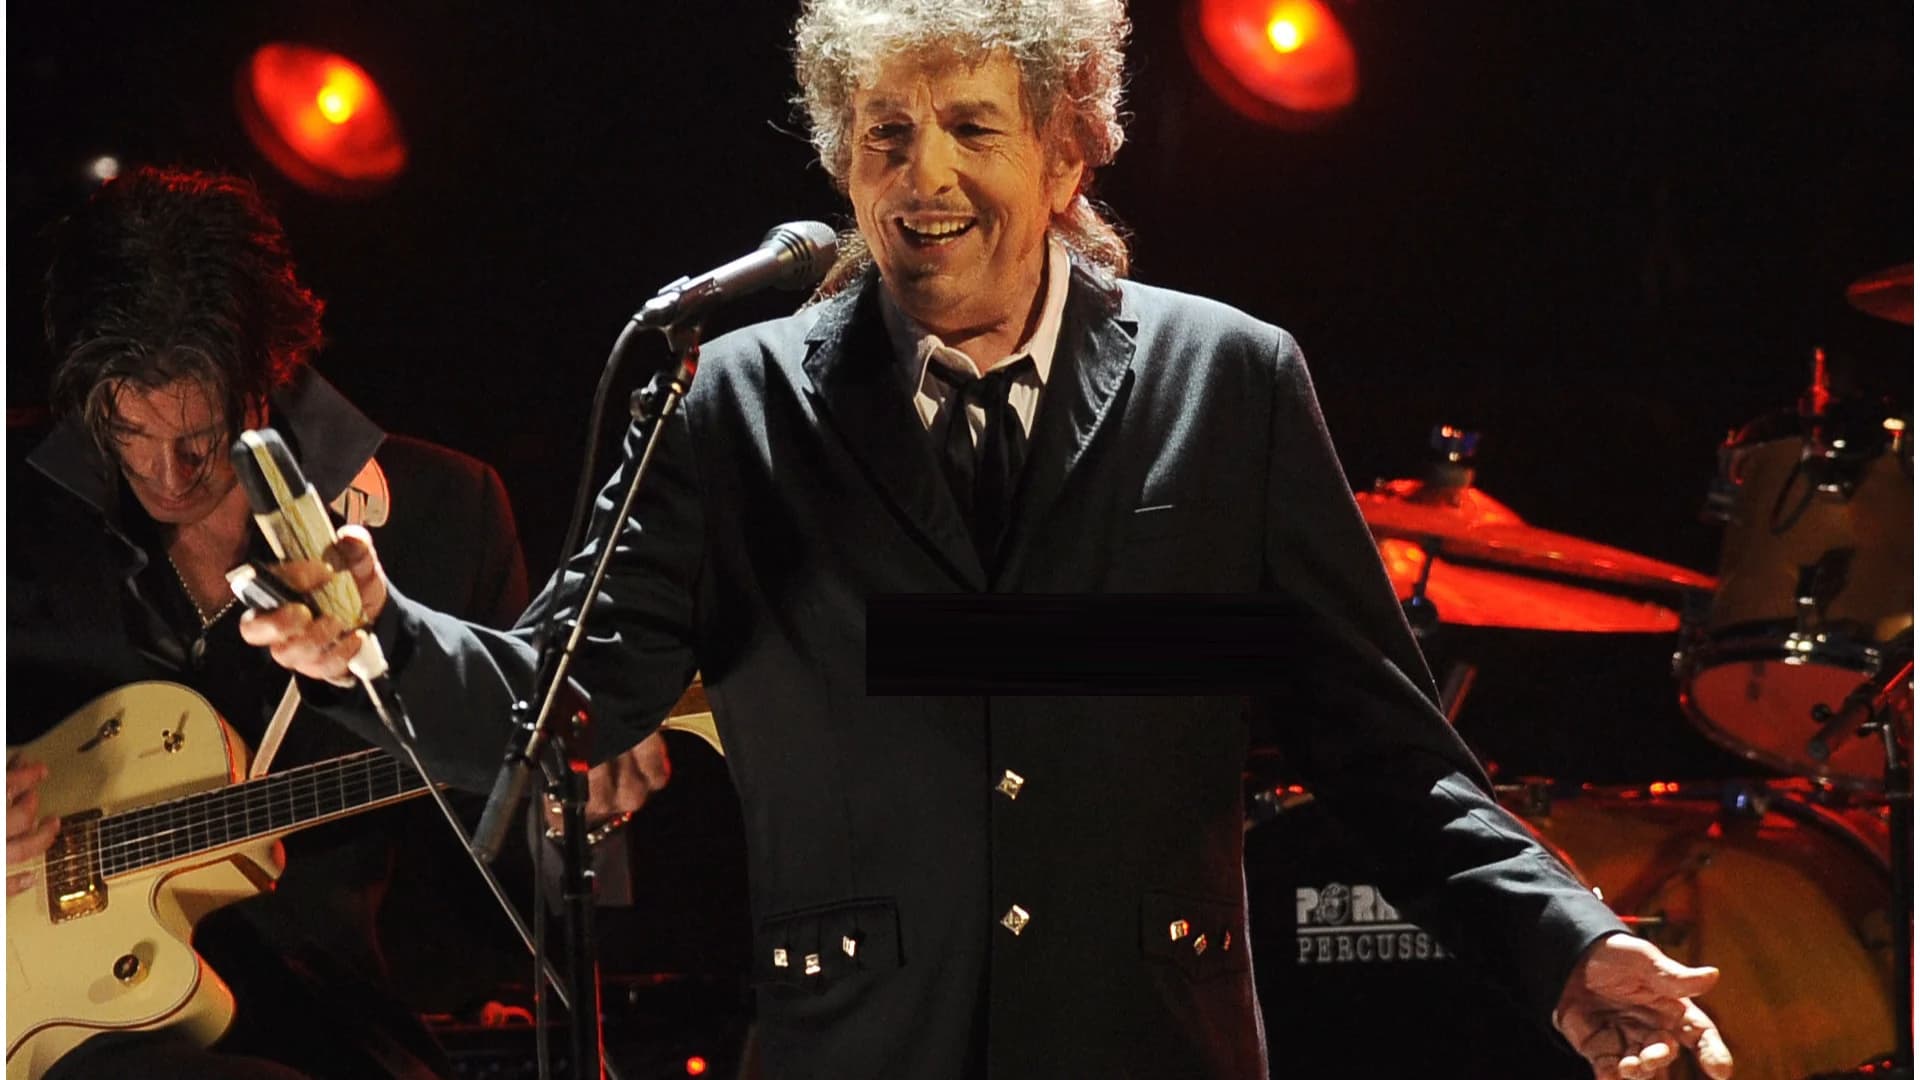 Entire Bob Dylan catalog acquired by Universal Music